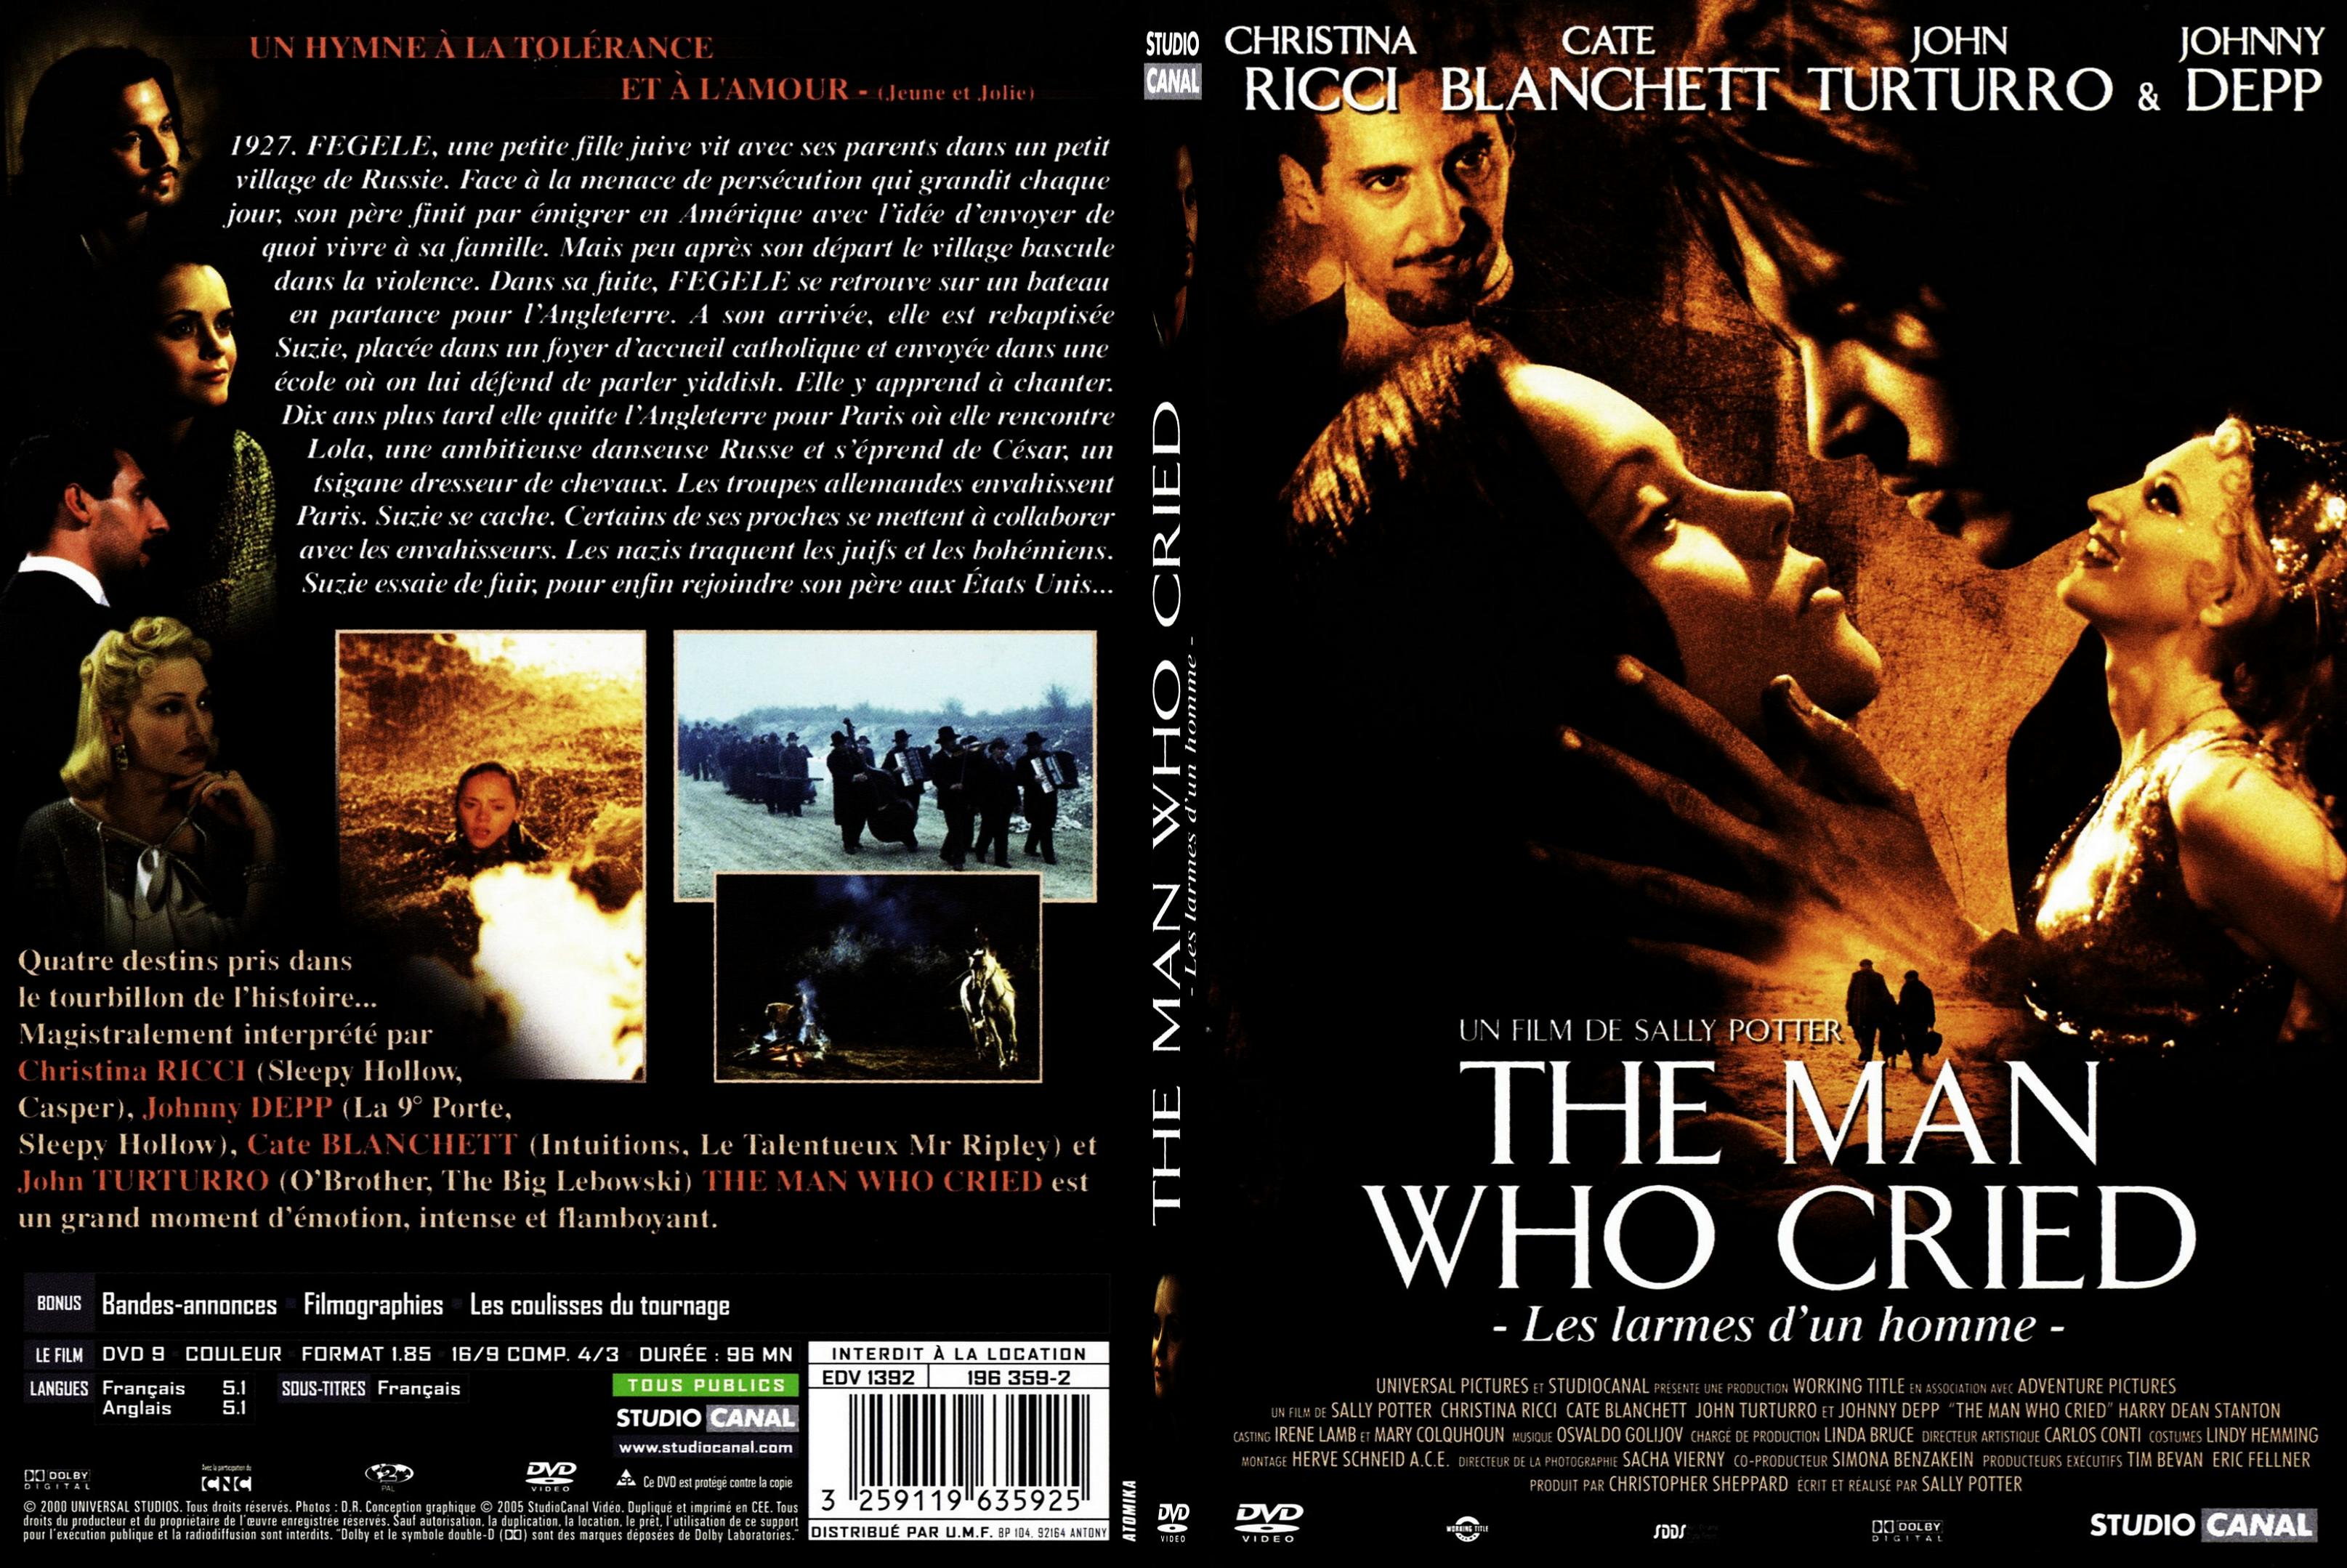 Jaquette DVD The man who cried - SLIM